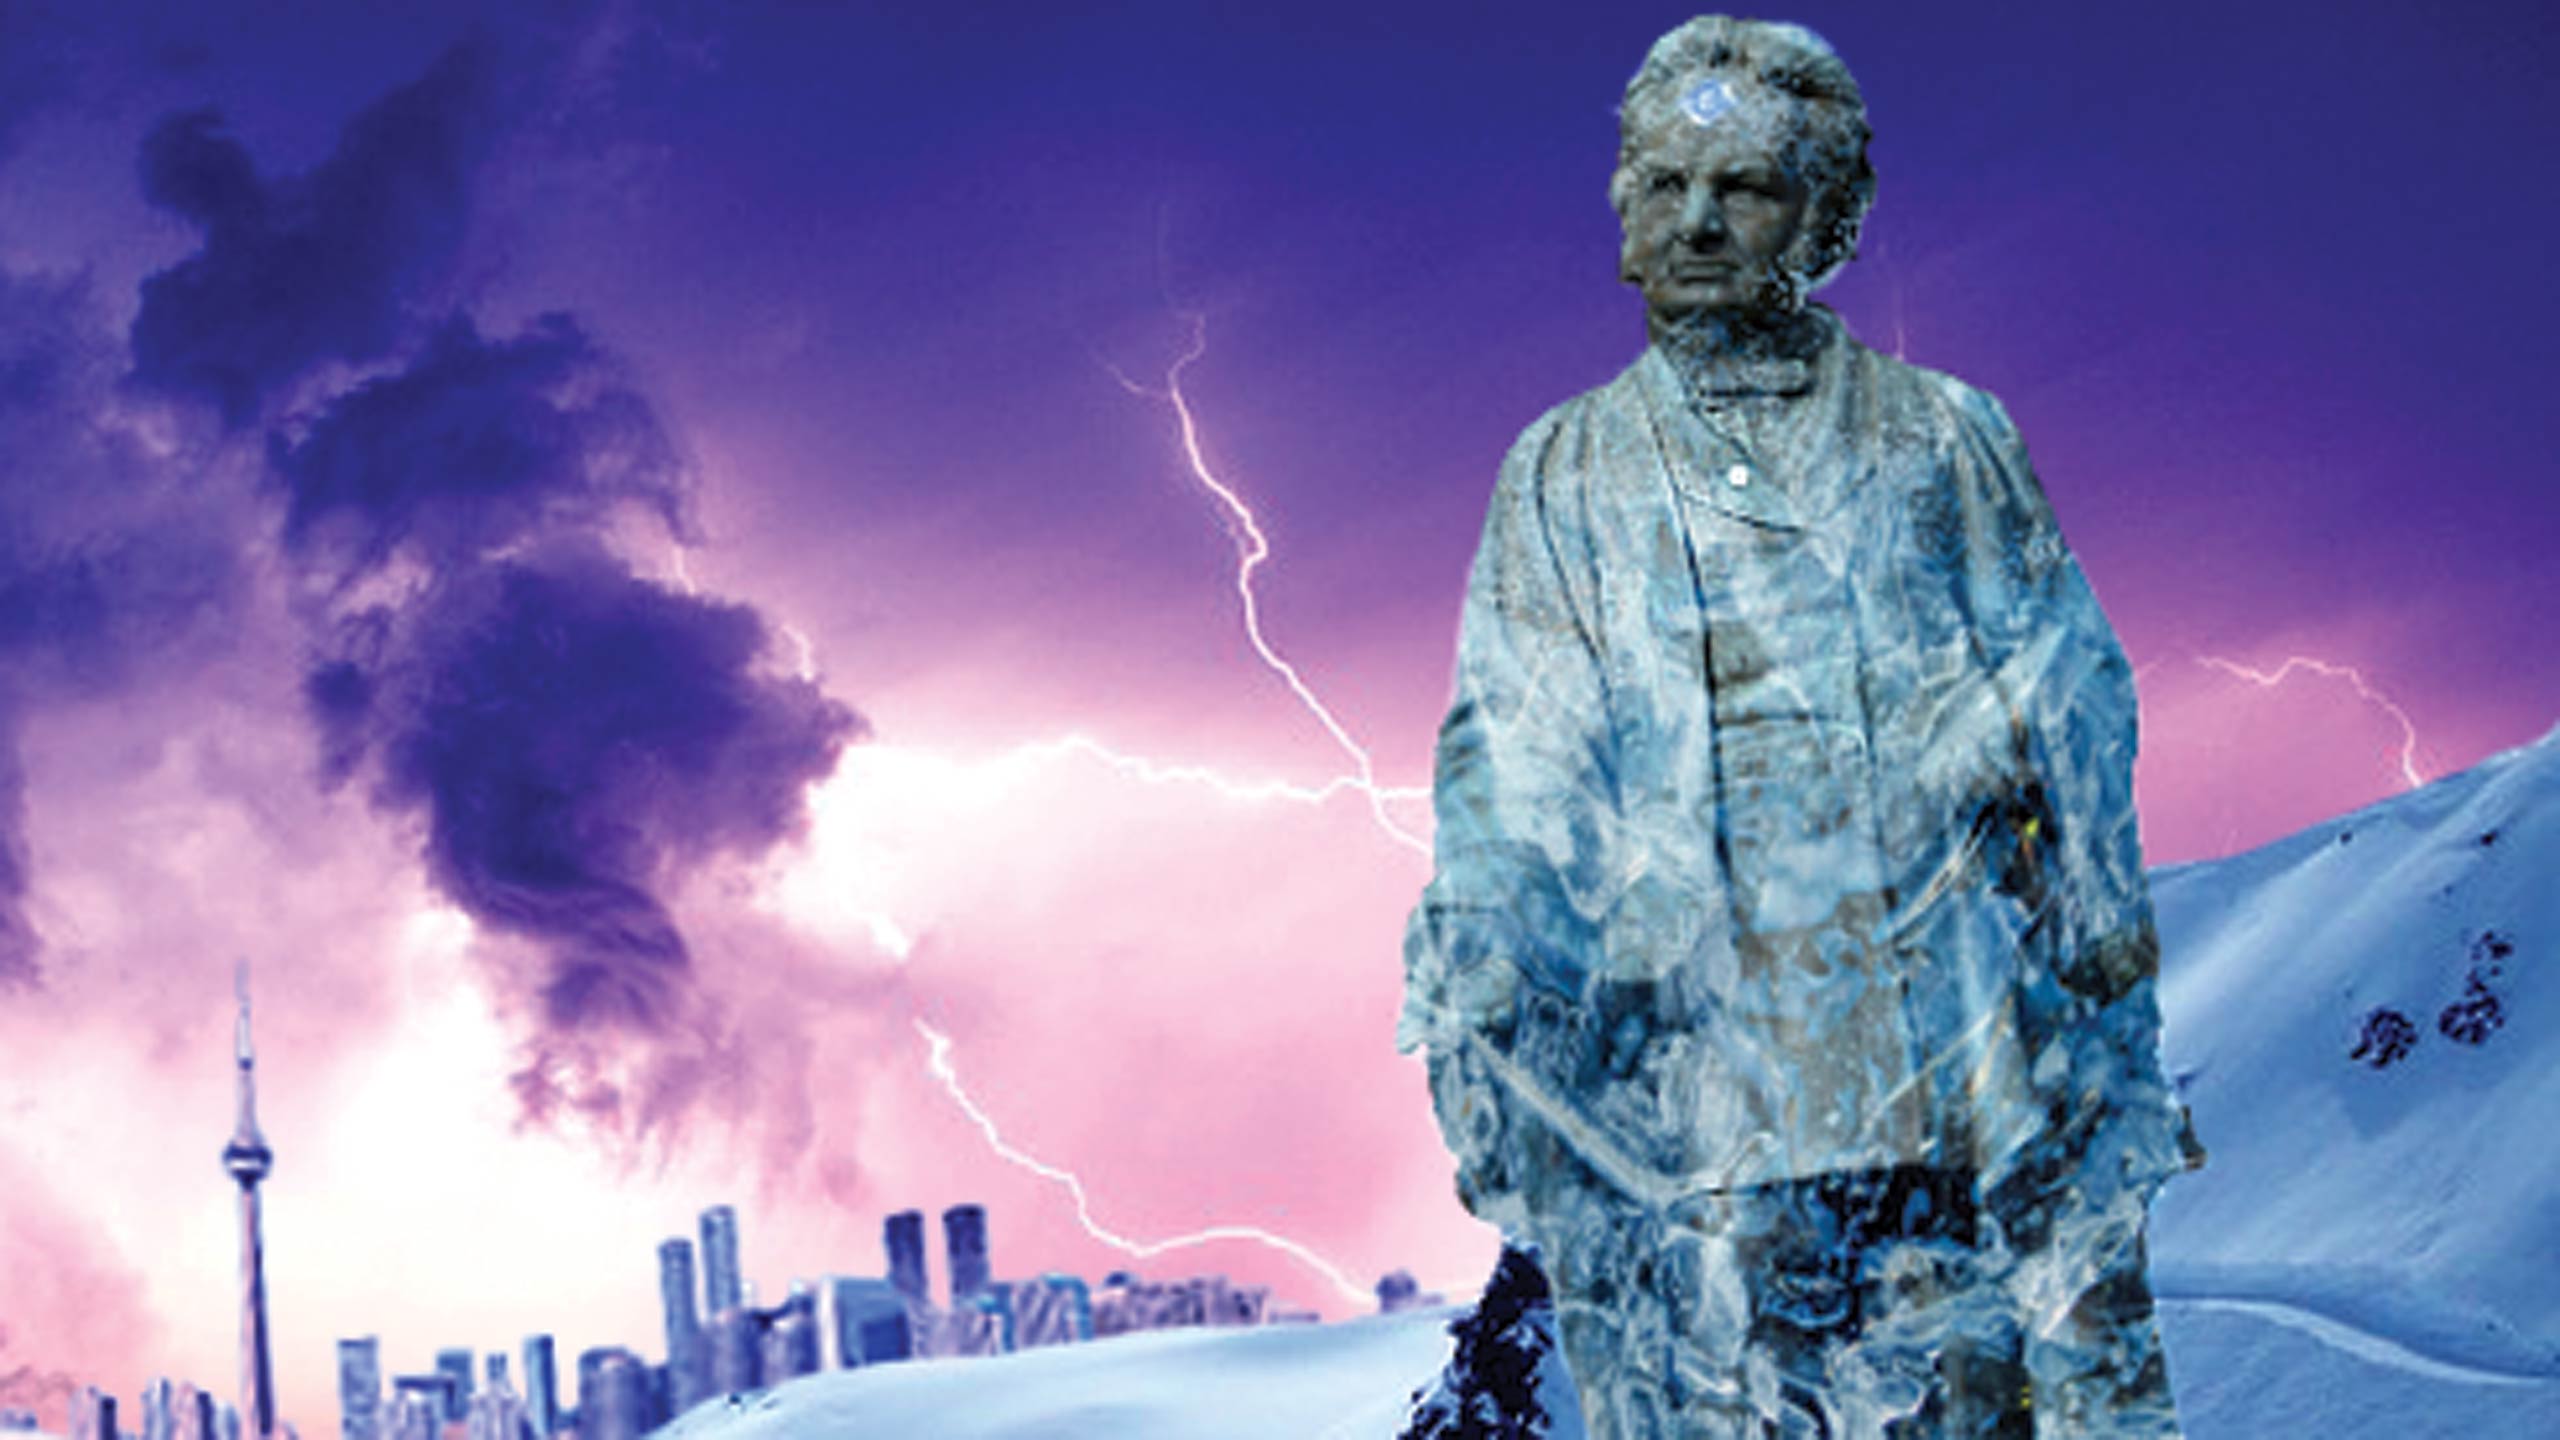 The day after tomorrow and the day after that. PHOTO ILLUSTRATION: Keith Capstick